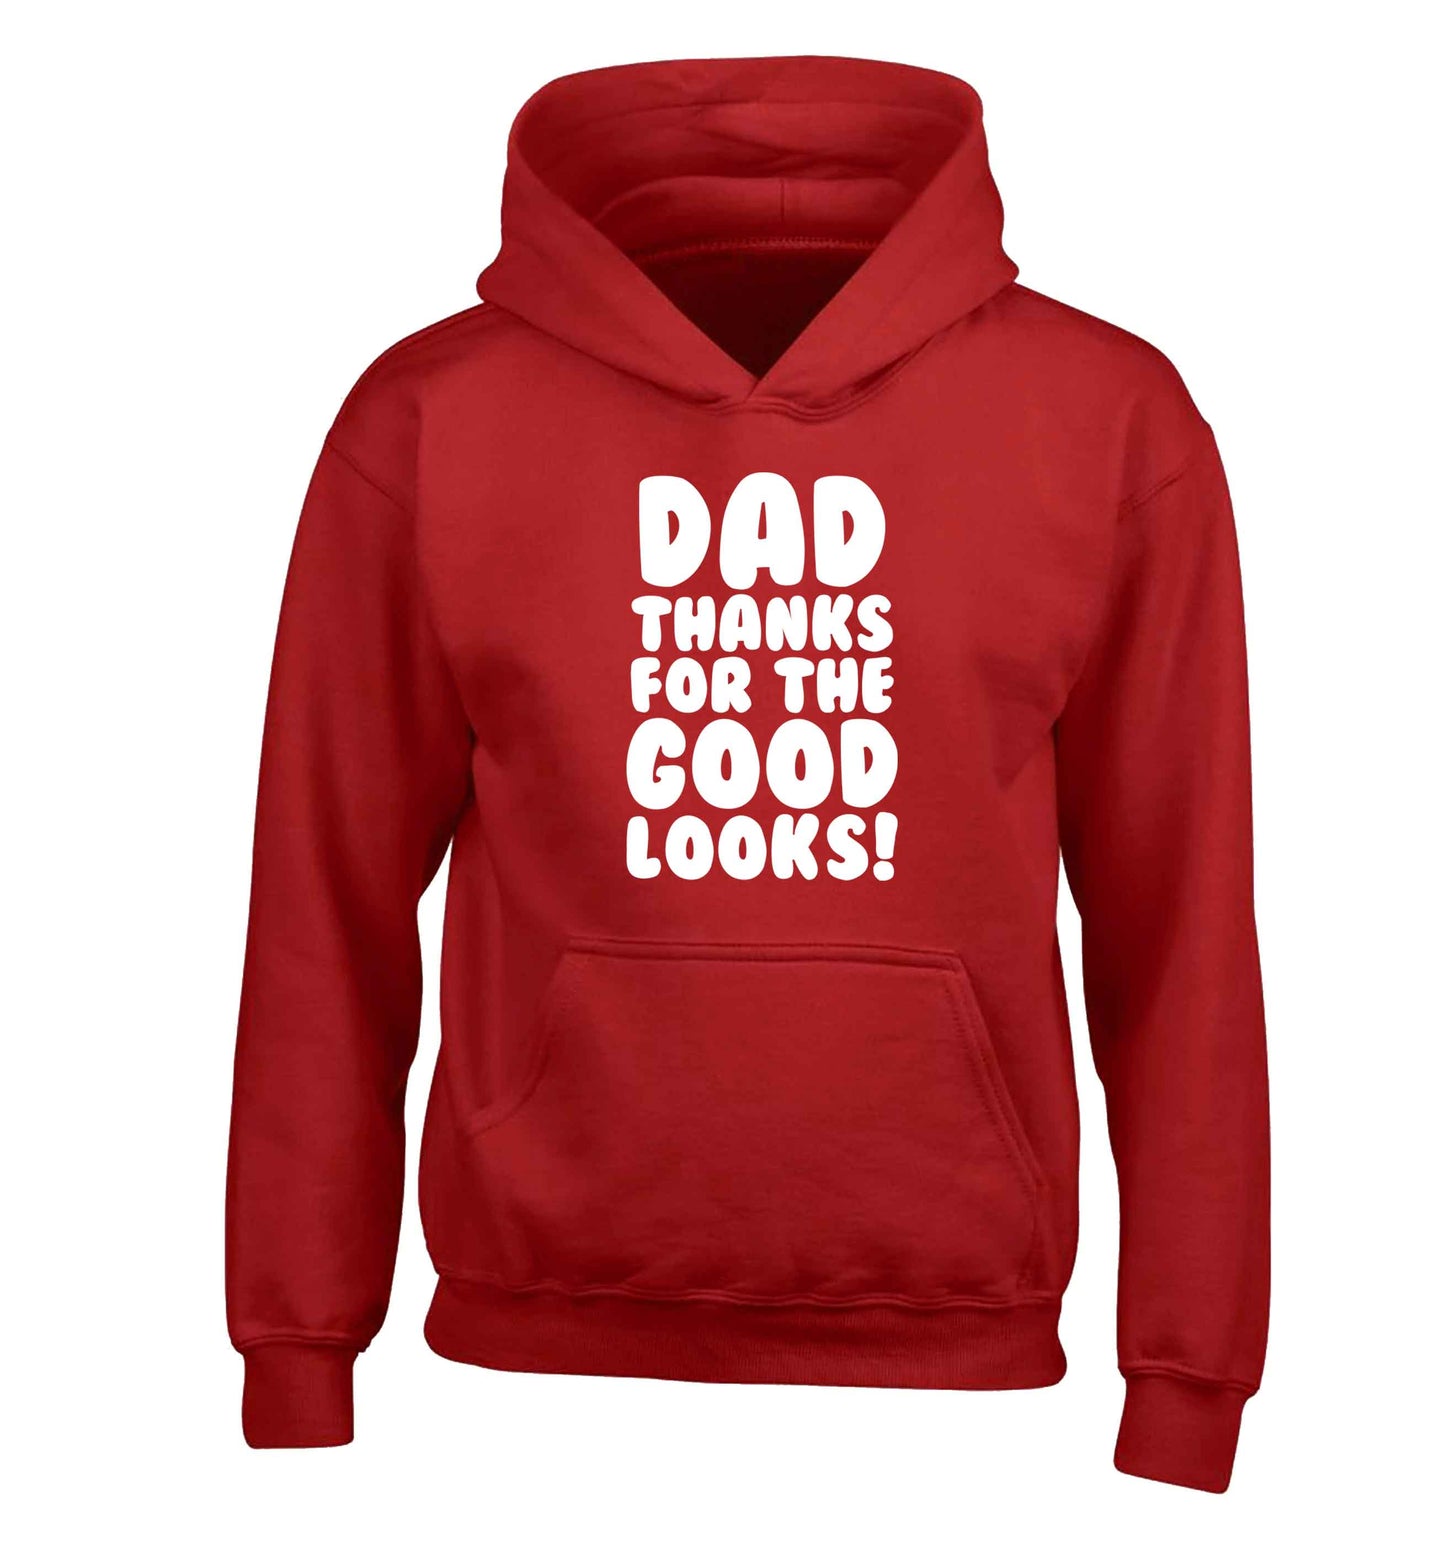 Dad thanks for the good looks children's red hoodie 12-13 Years